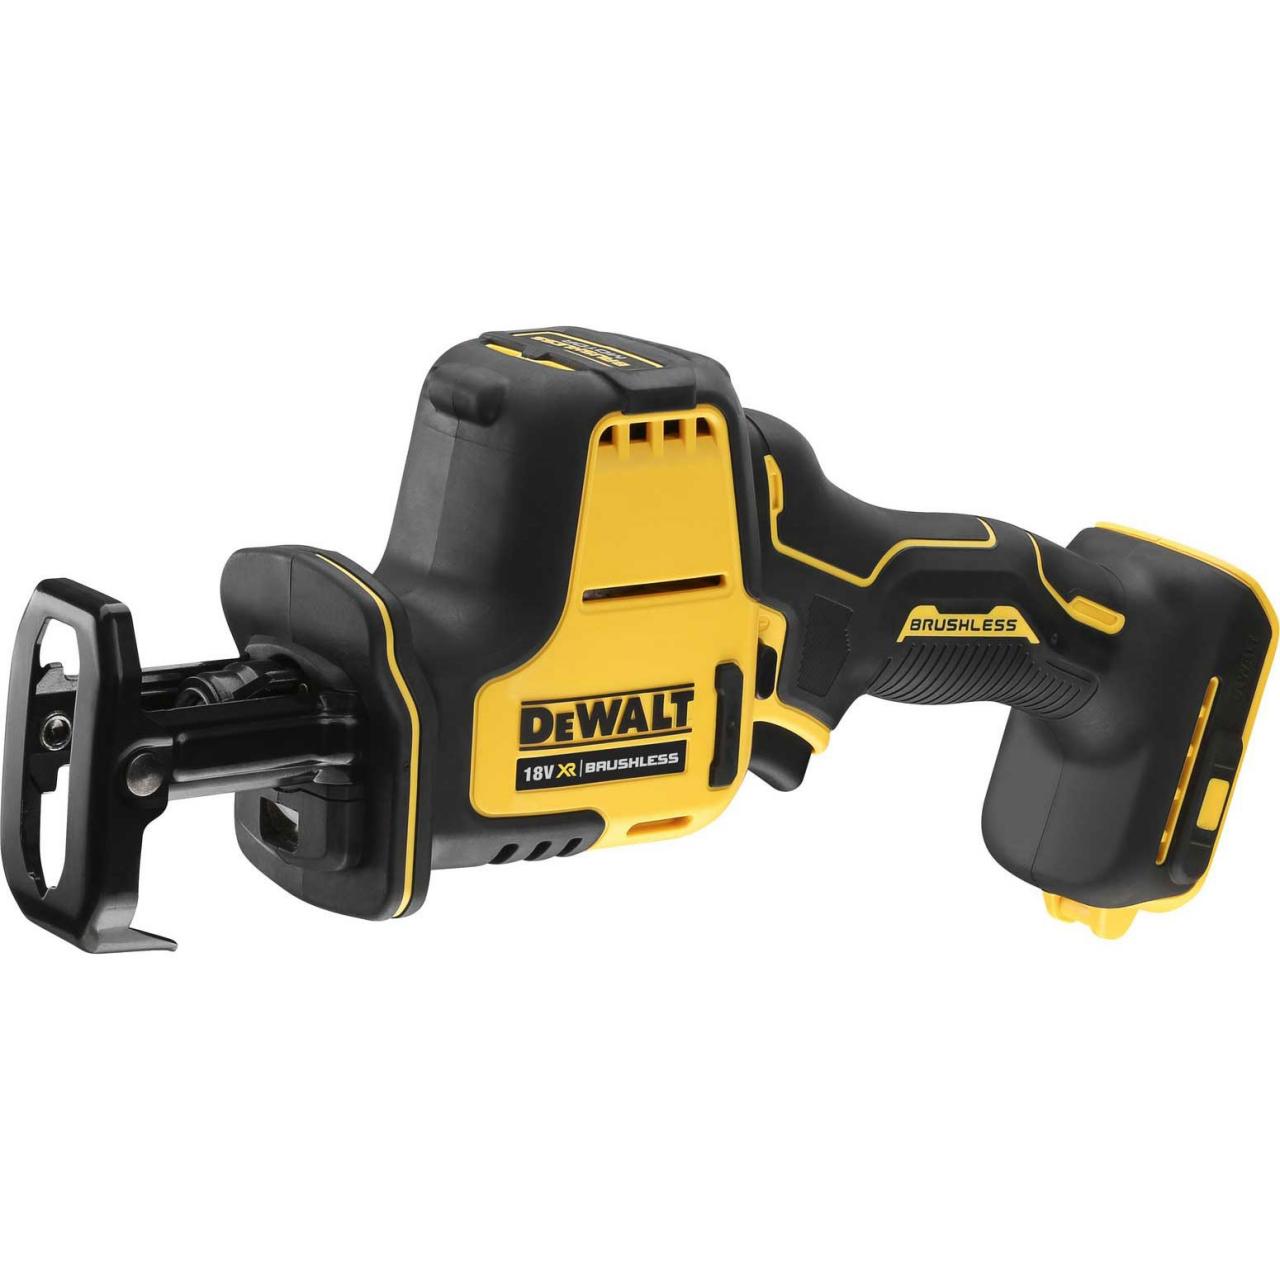 XTREME 12V MAX* Brushless One-Handed Cordless Reciprocating Saw (Tool Only)  - DCS312B | DEWALT